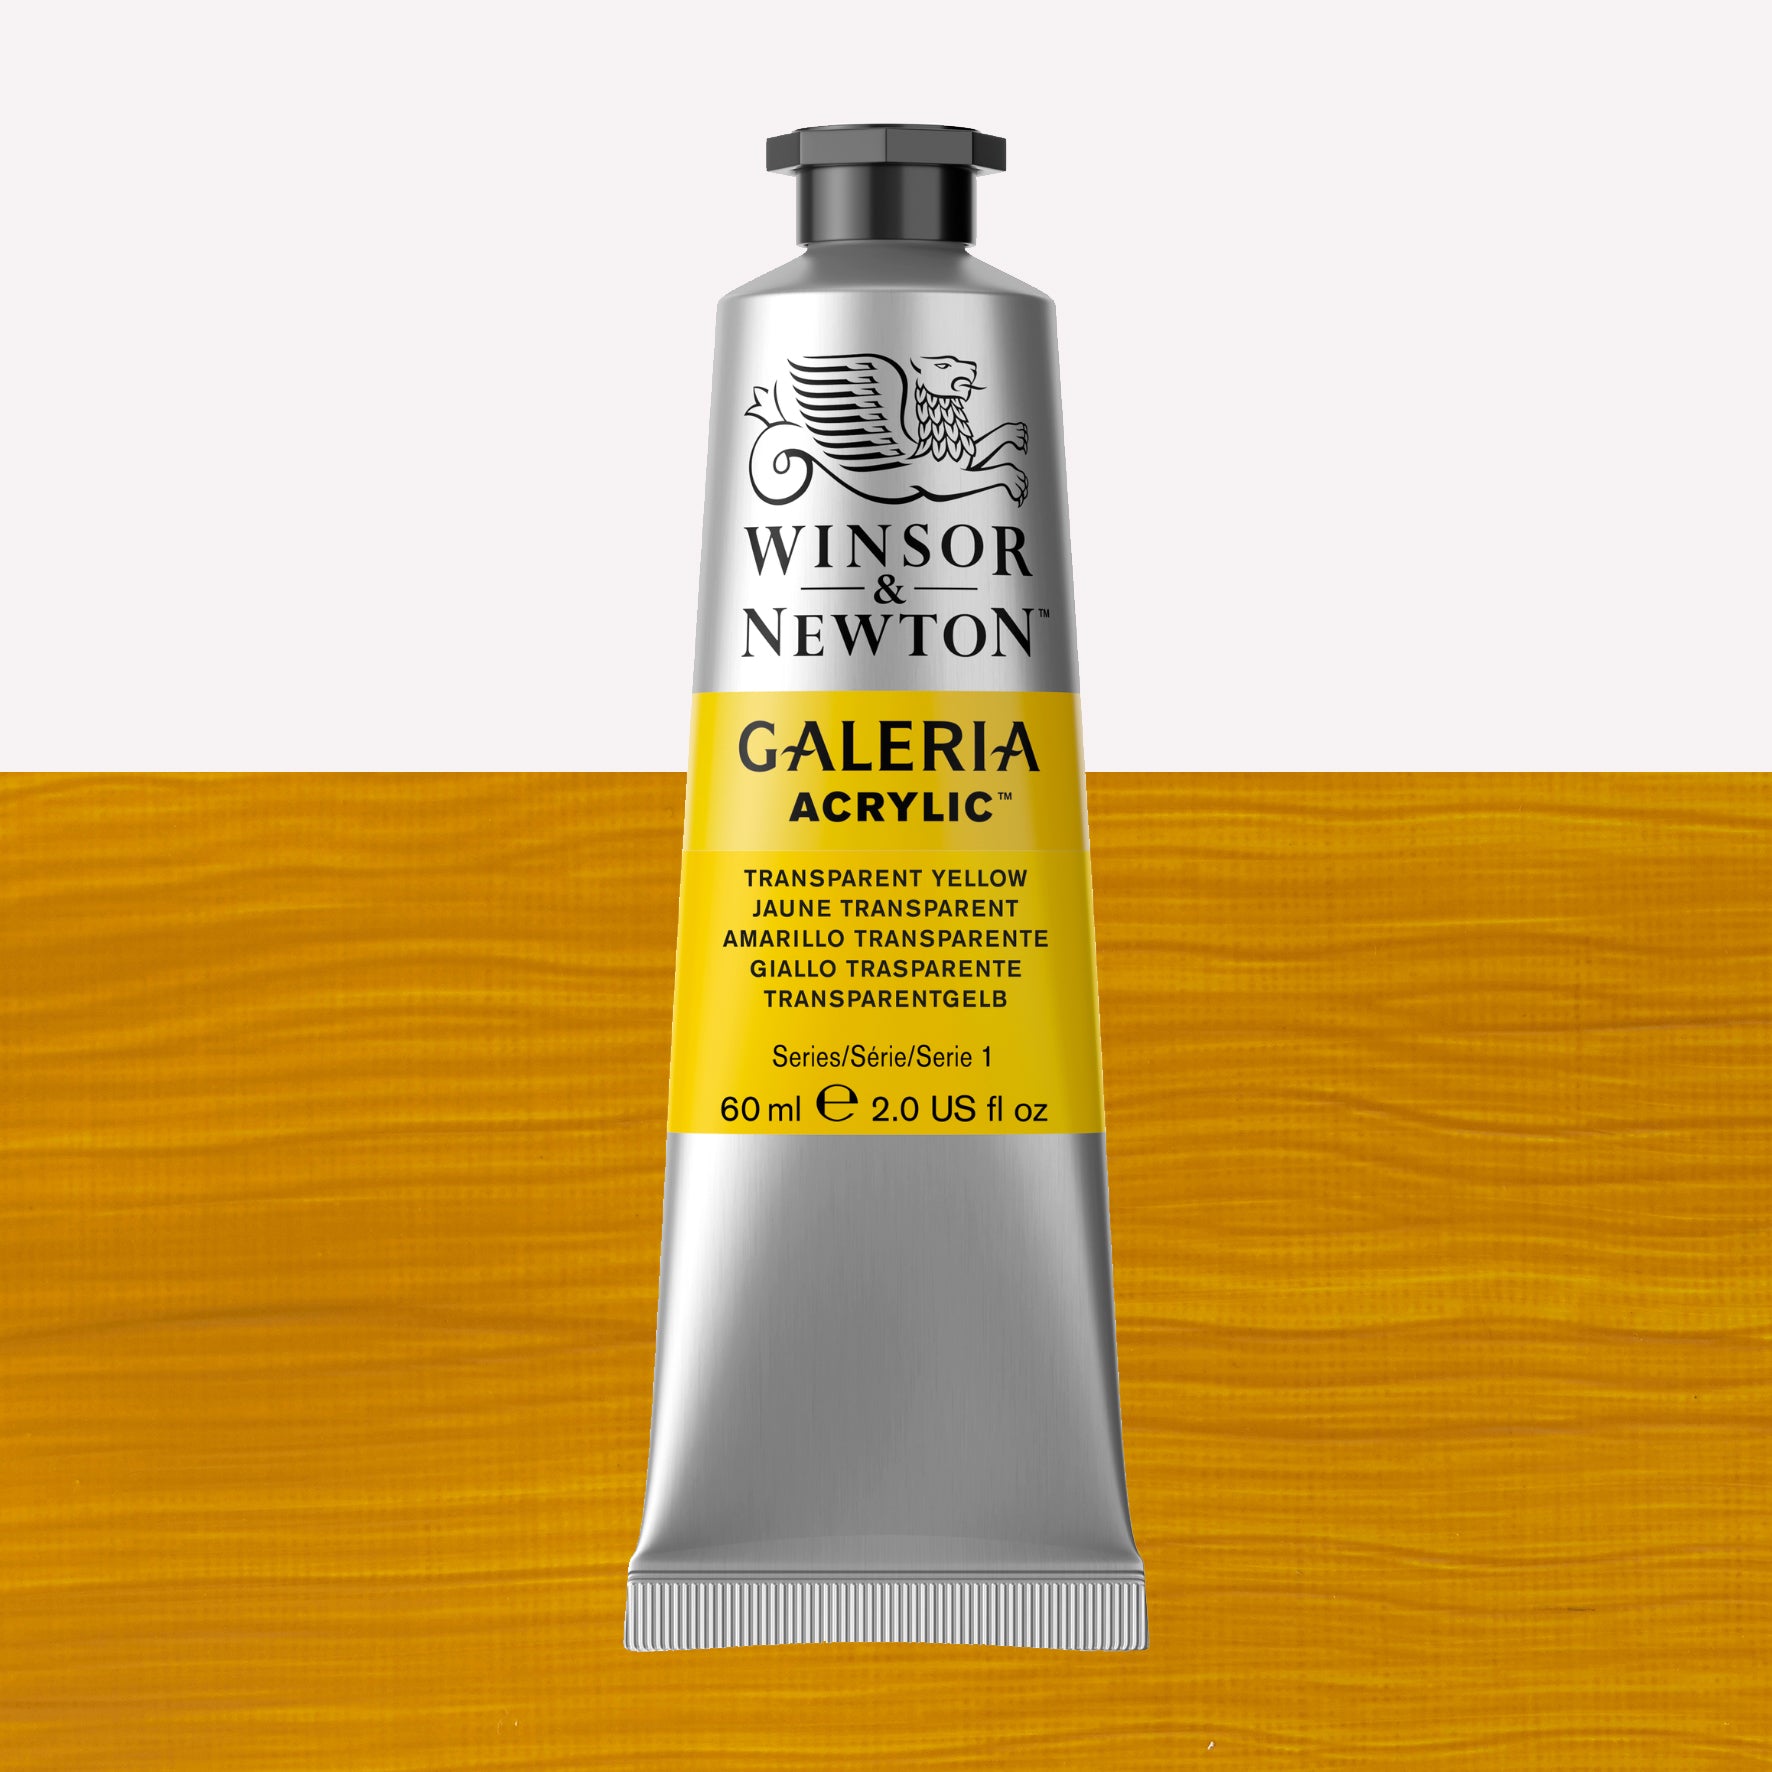 A 60ml tube of vibrant Galeria Acrylic paint in the shade Transparent Yellow . This paint, made by Winsor and Newton, is packaged in a silver tube with a black lid. 